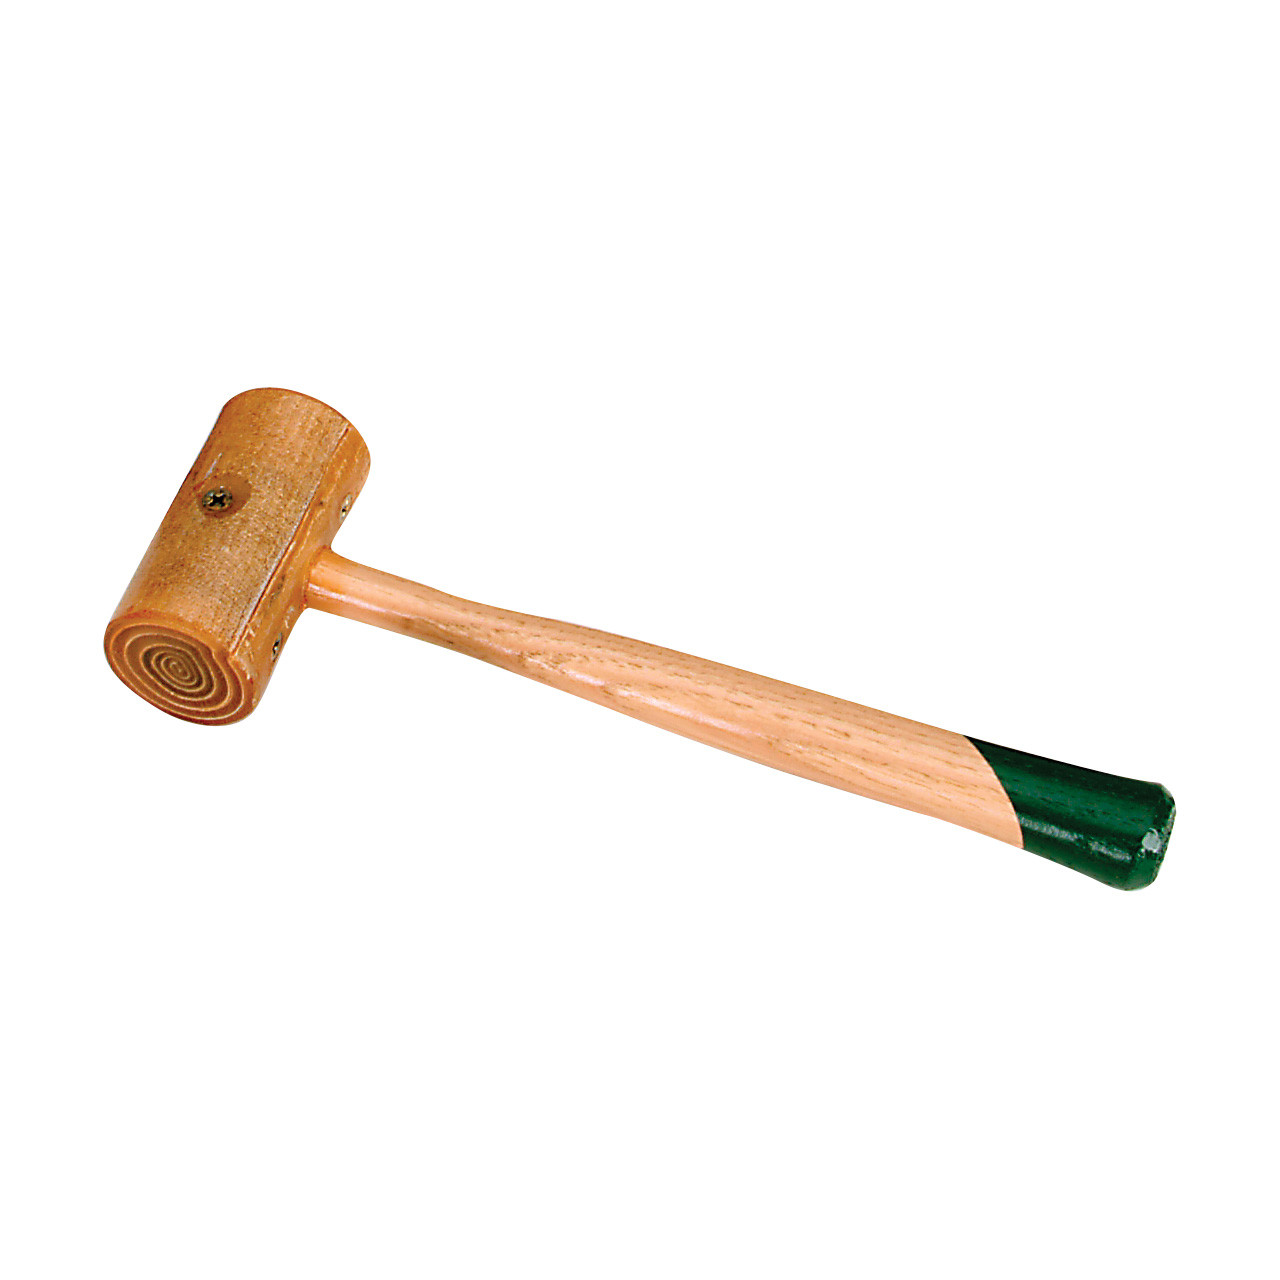 Weighted Rawhide Mallet - 8 oz.